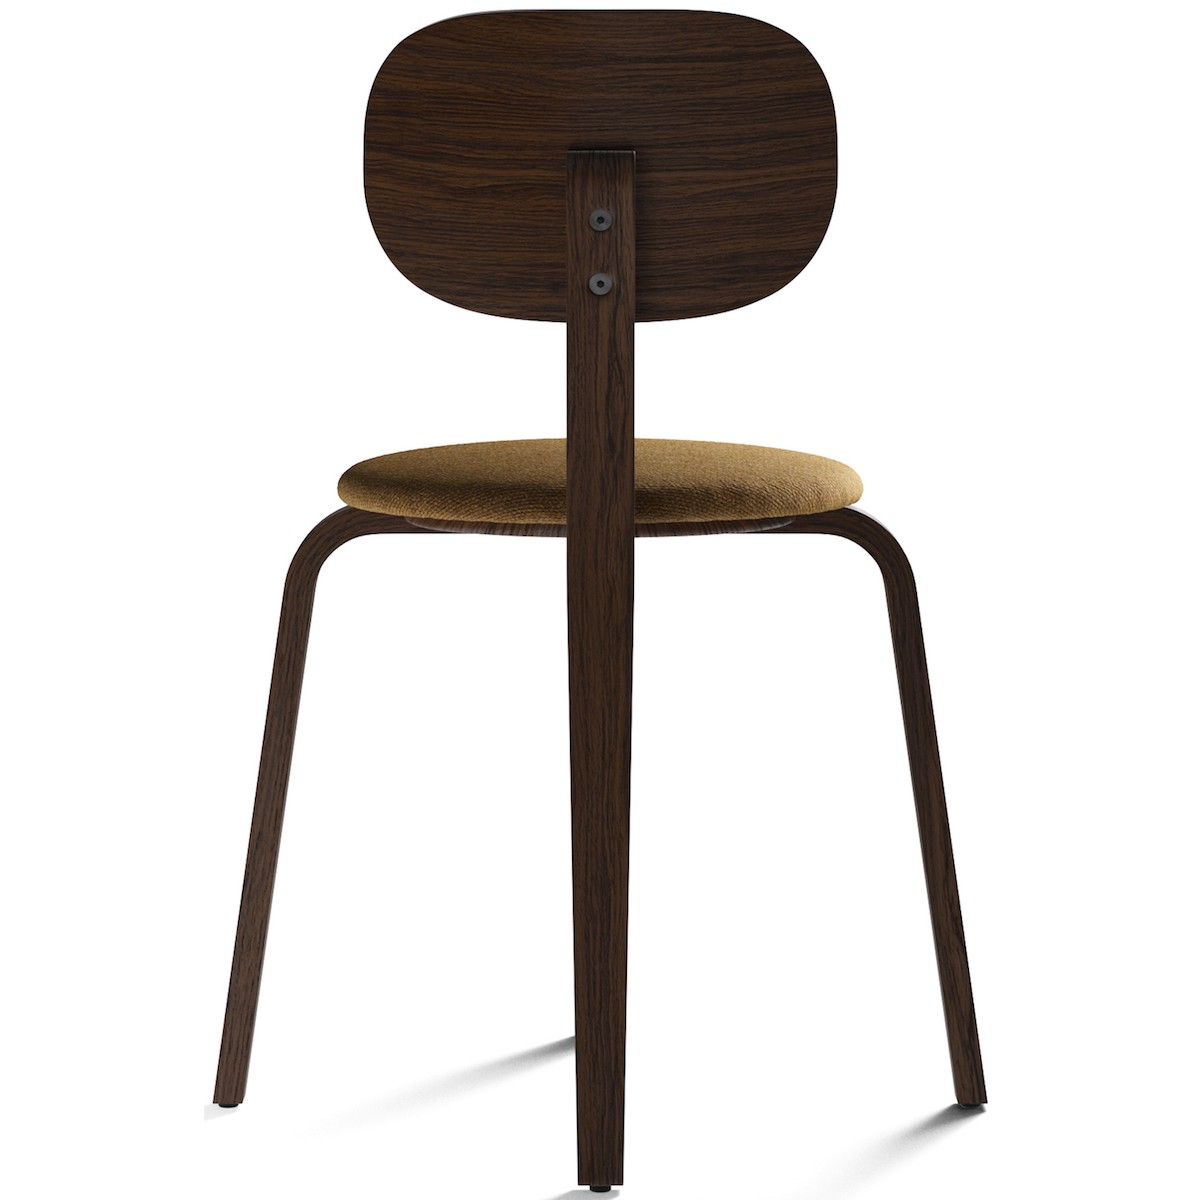 Afteroom Plywood Dining chair – dark stained oak + Moss 22 fabric